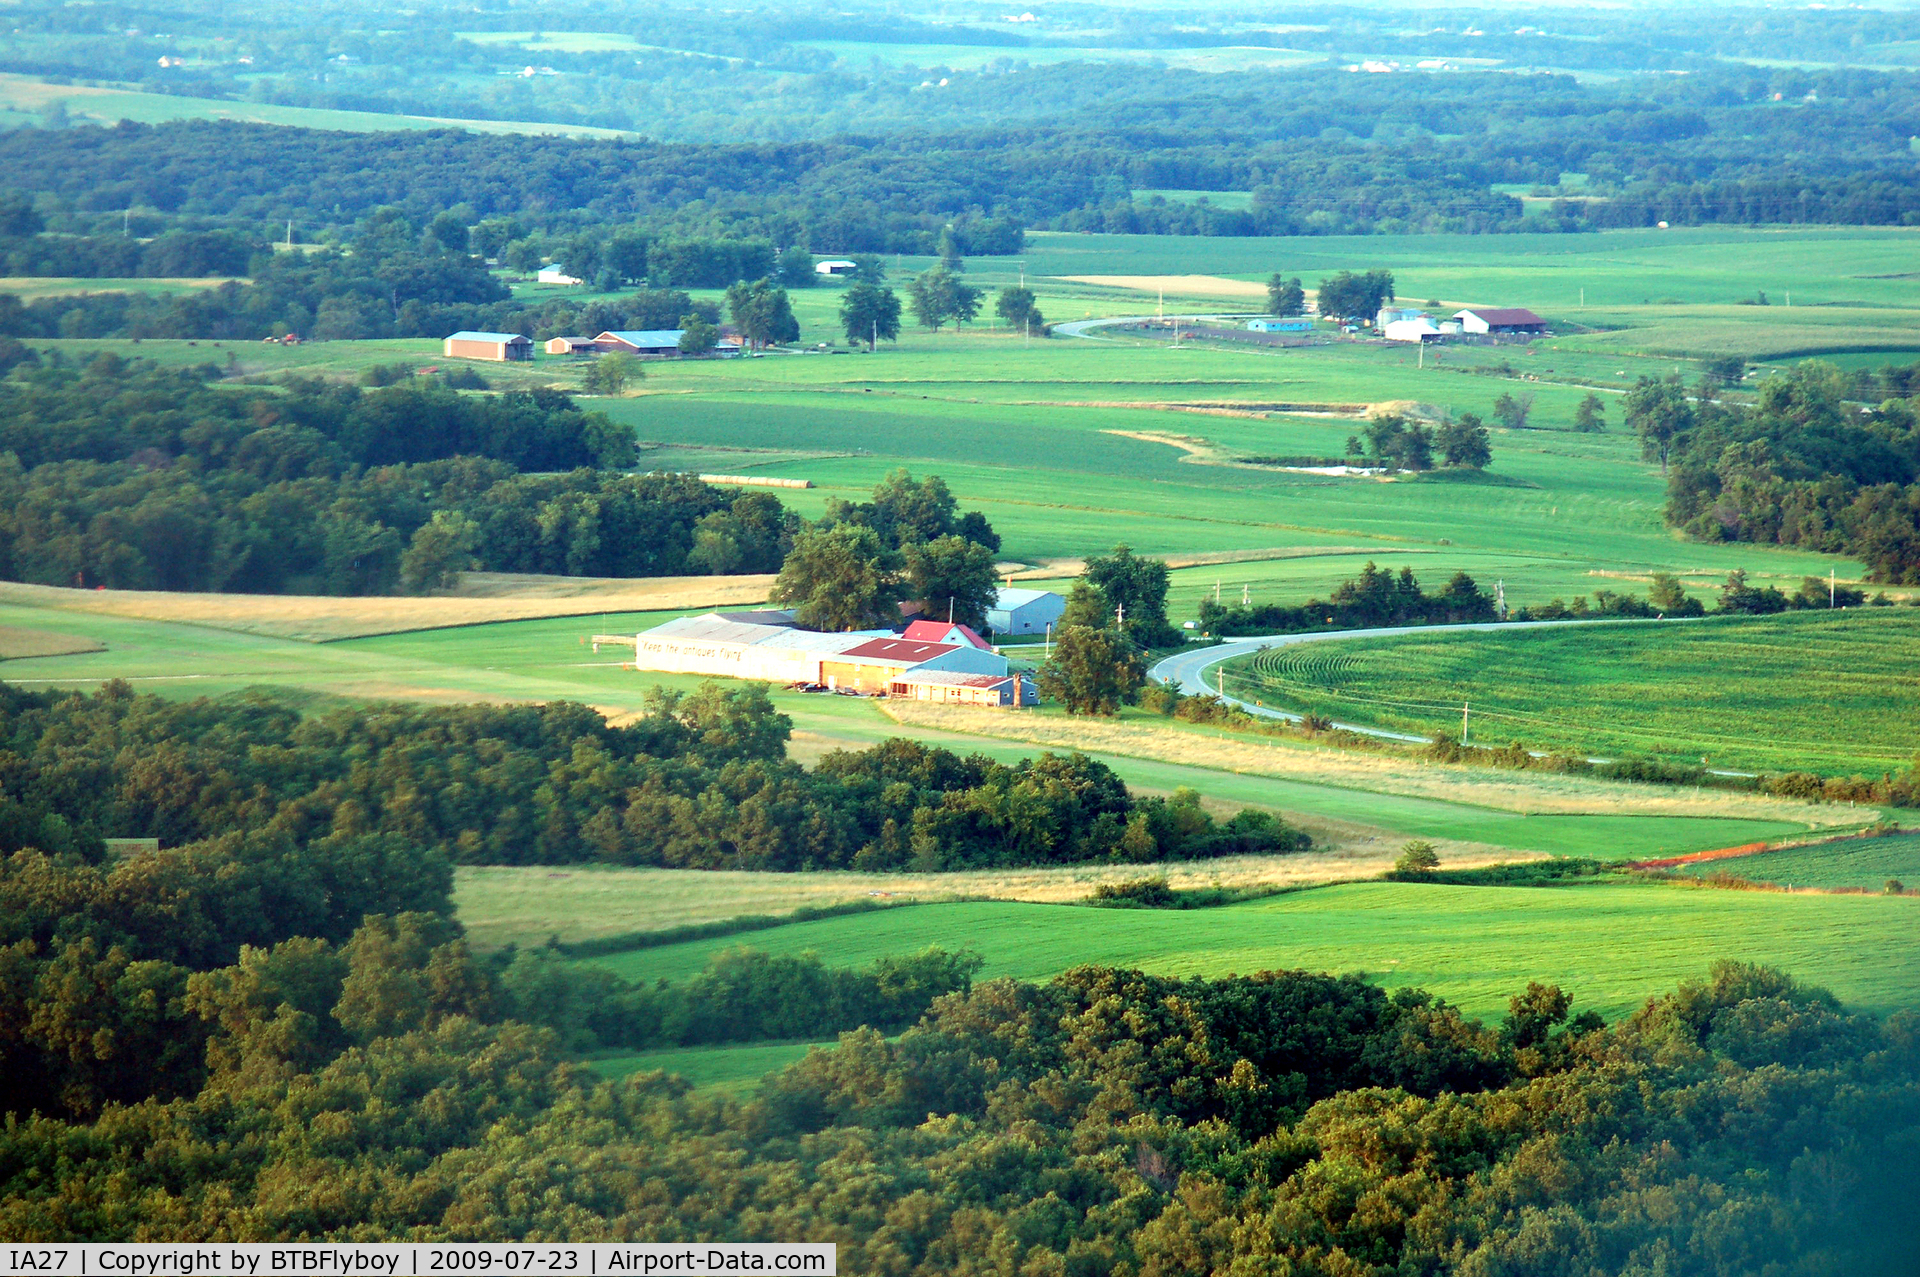 Antique Airfield Airport (IA27) - Looking NE